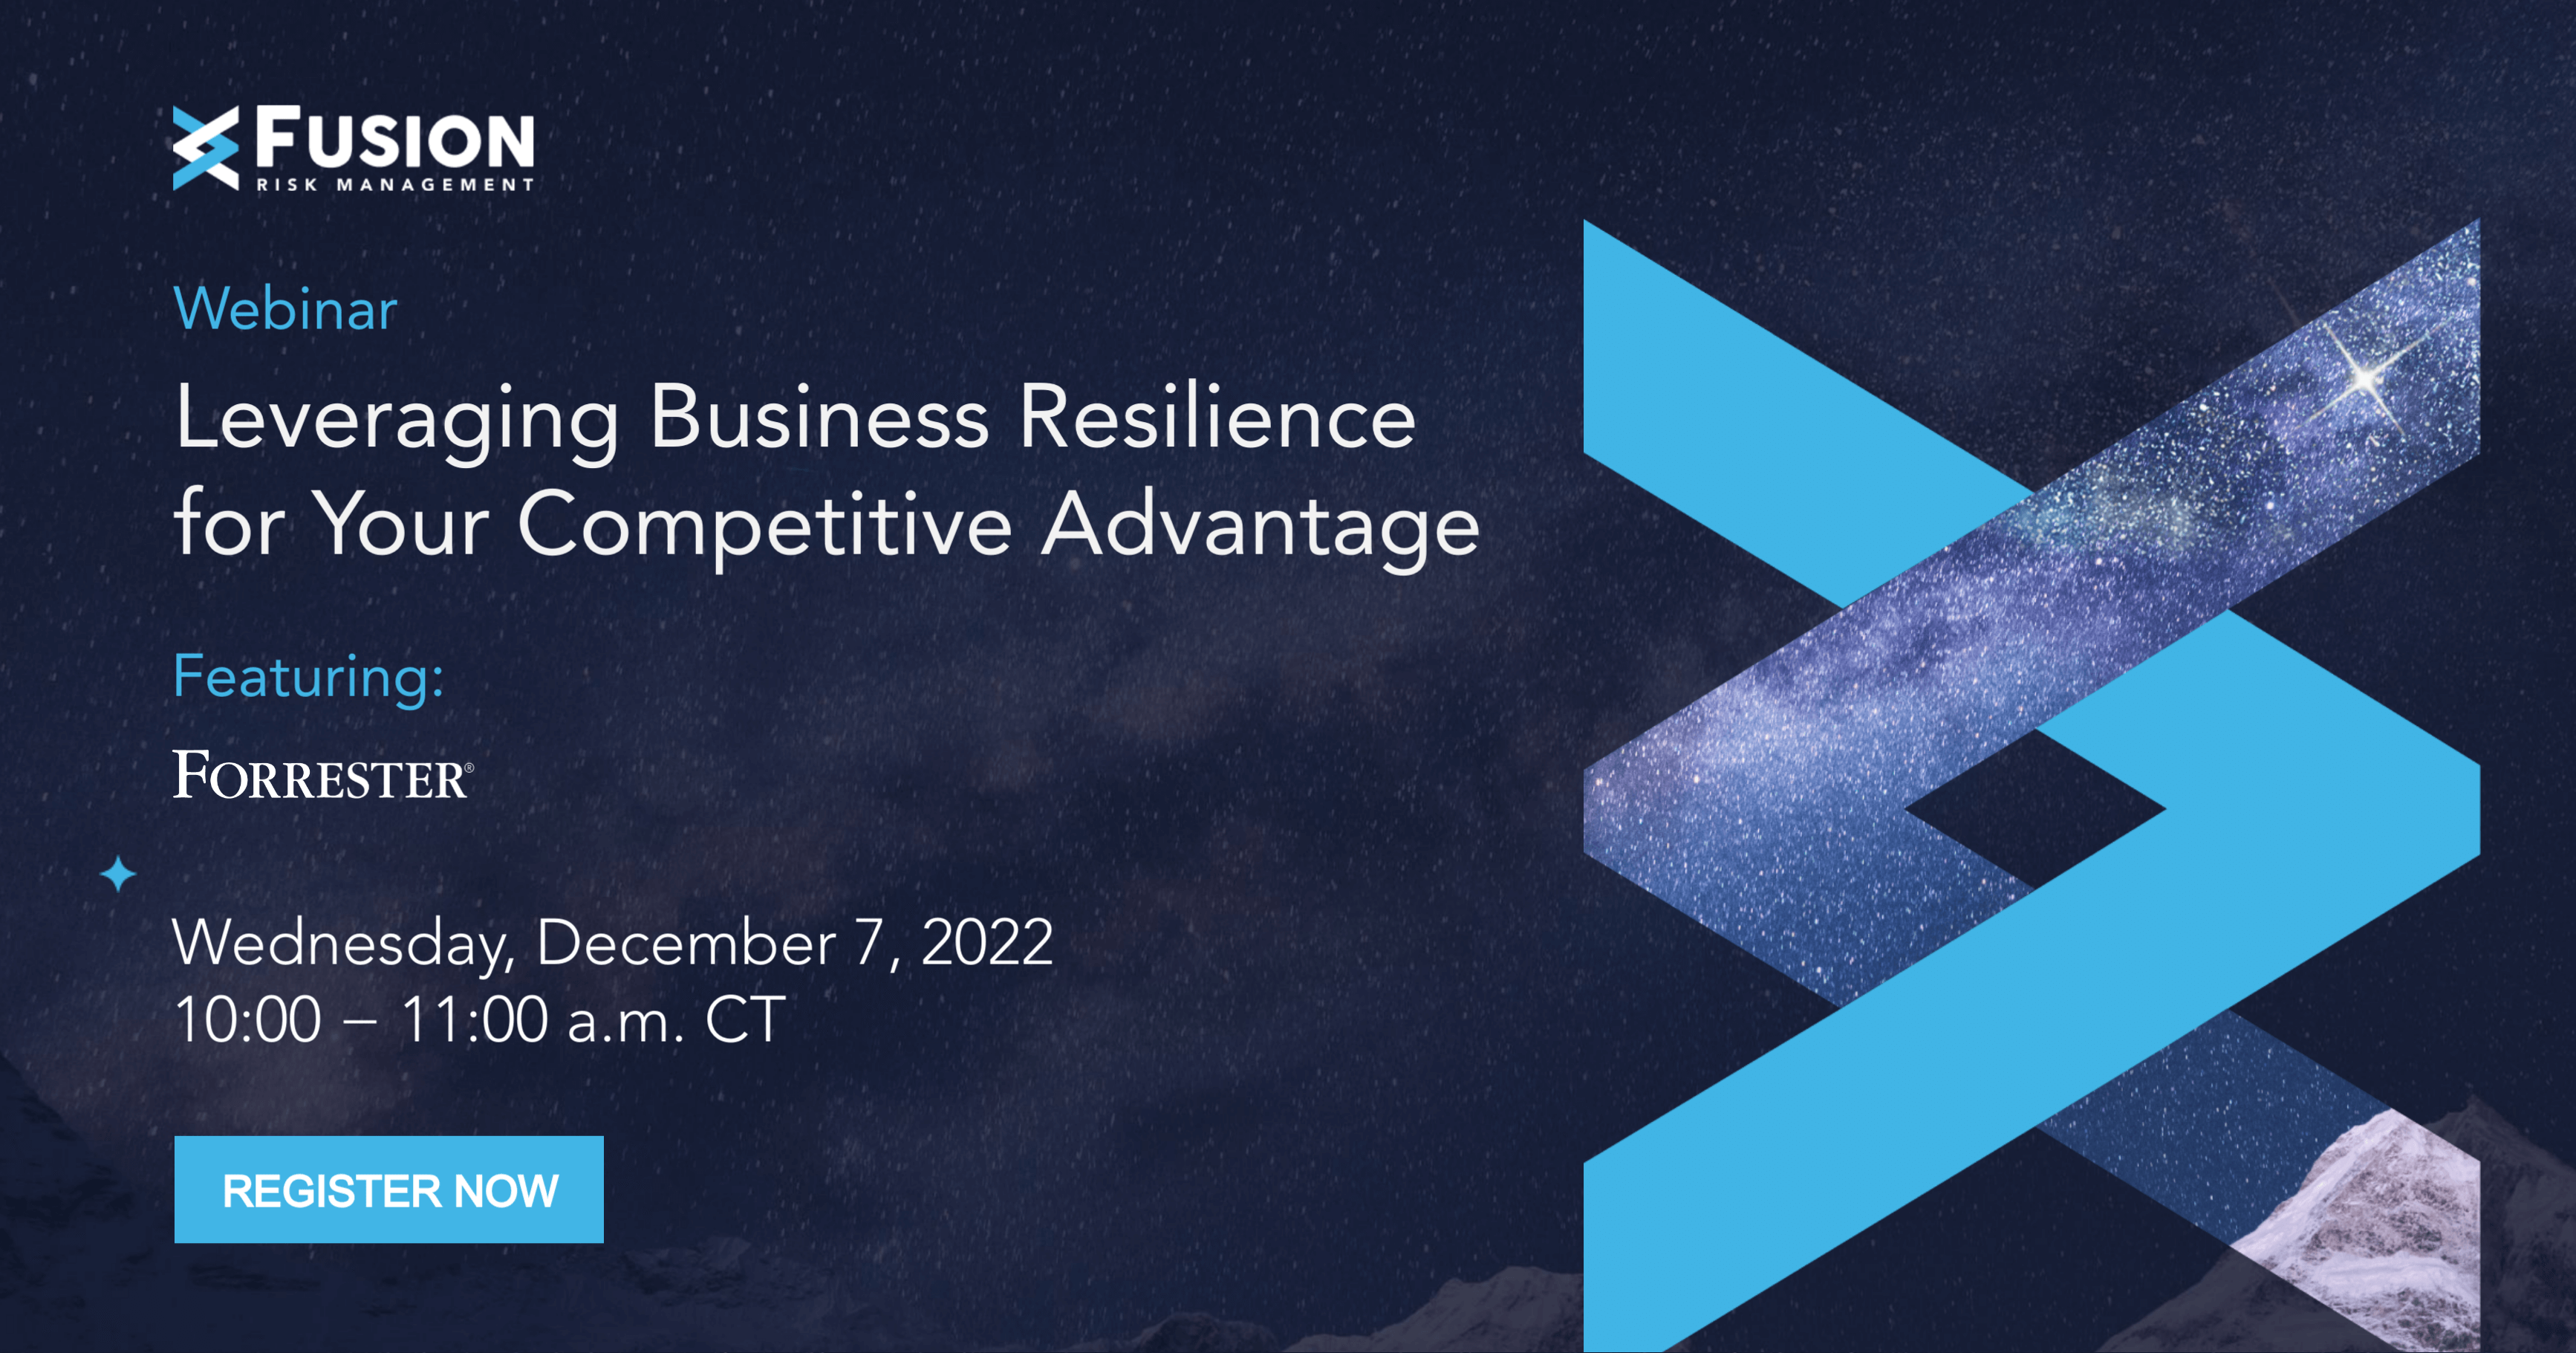 Leveraging Business Resilience for Your Competitive Advantage